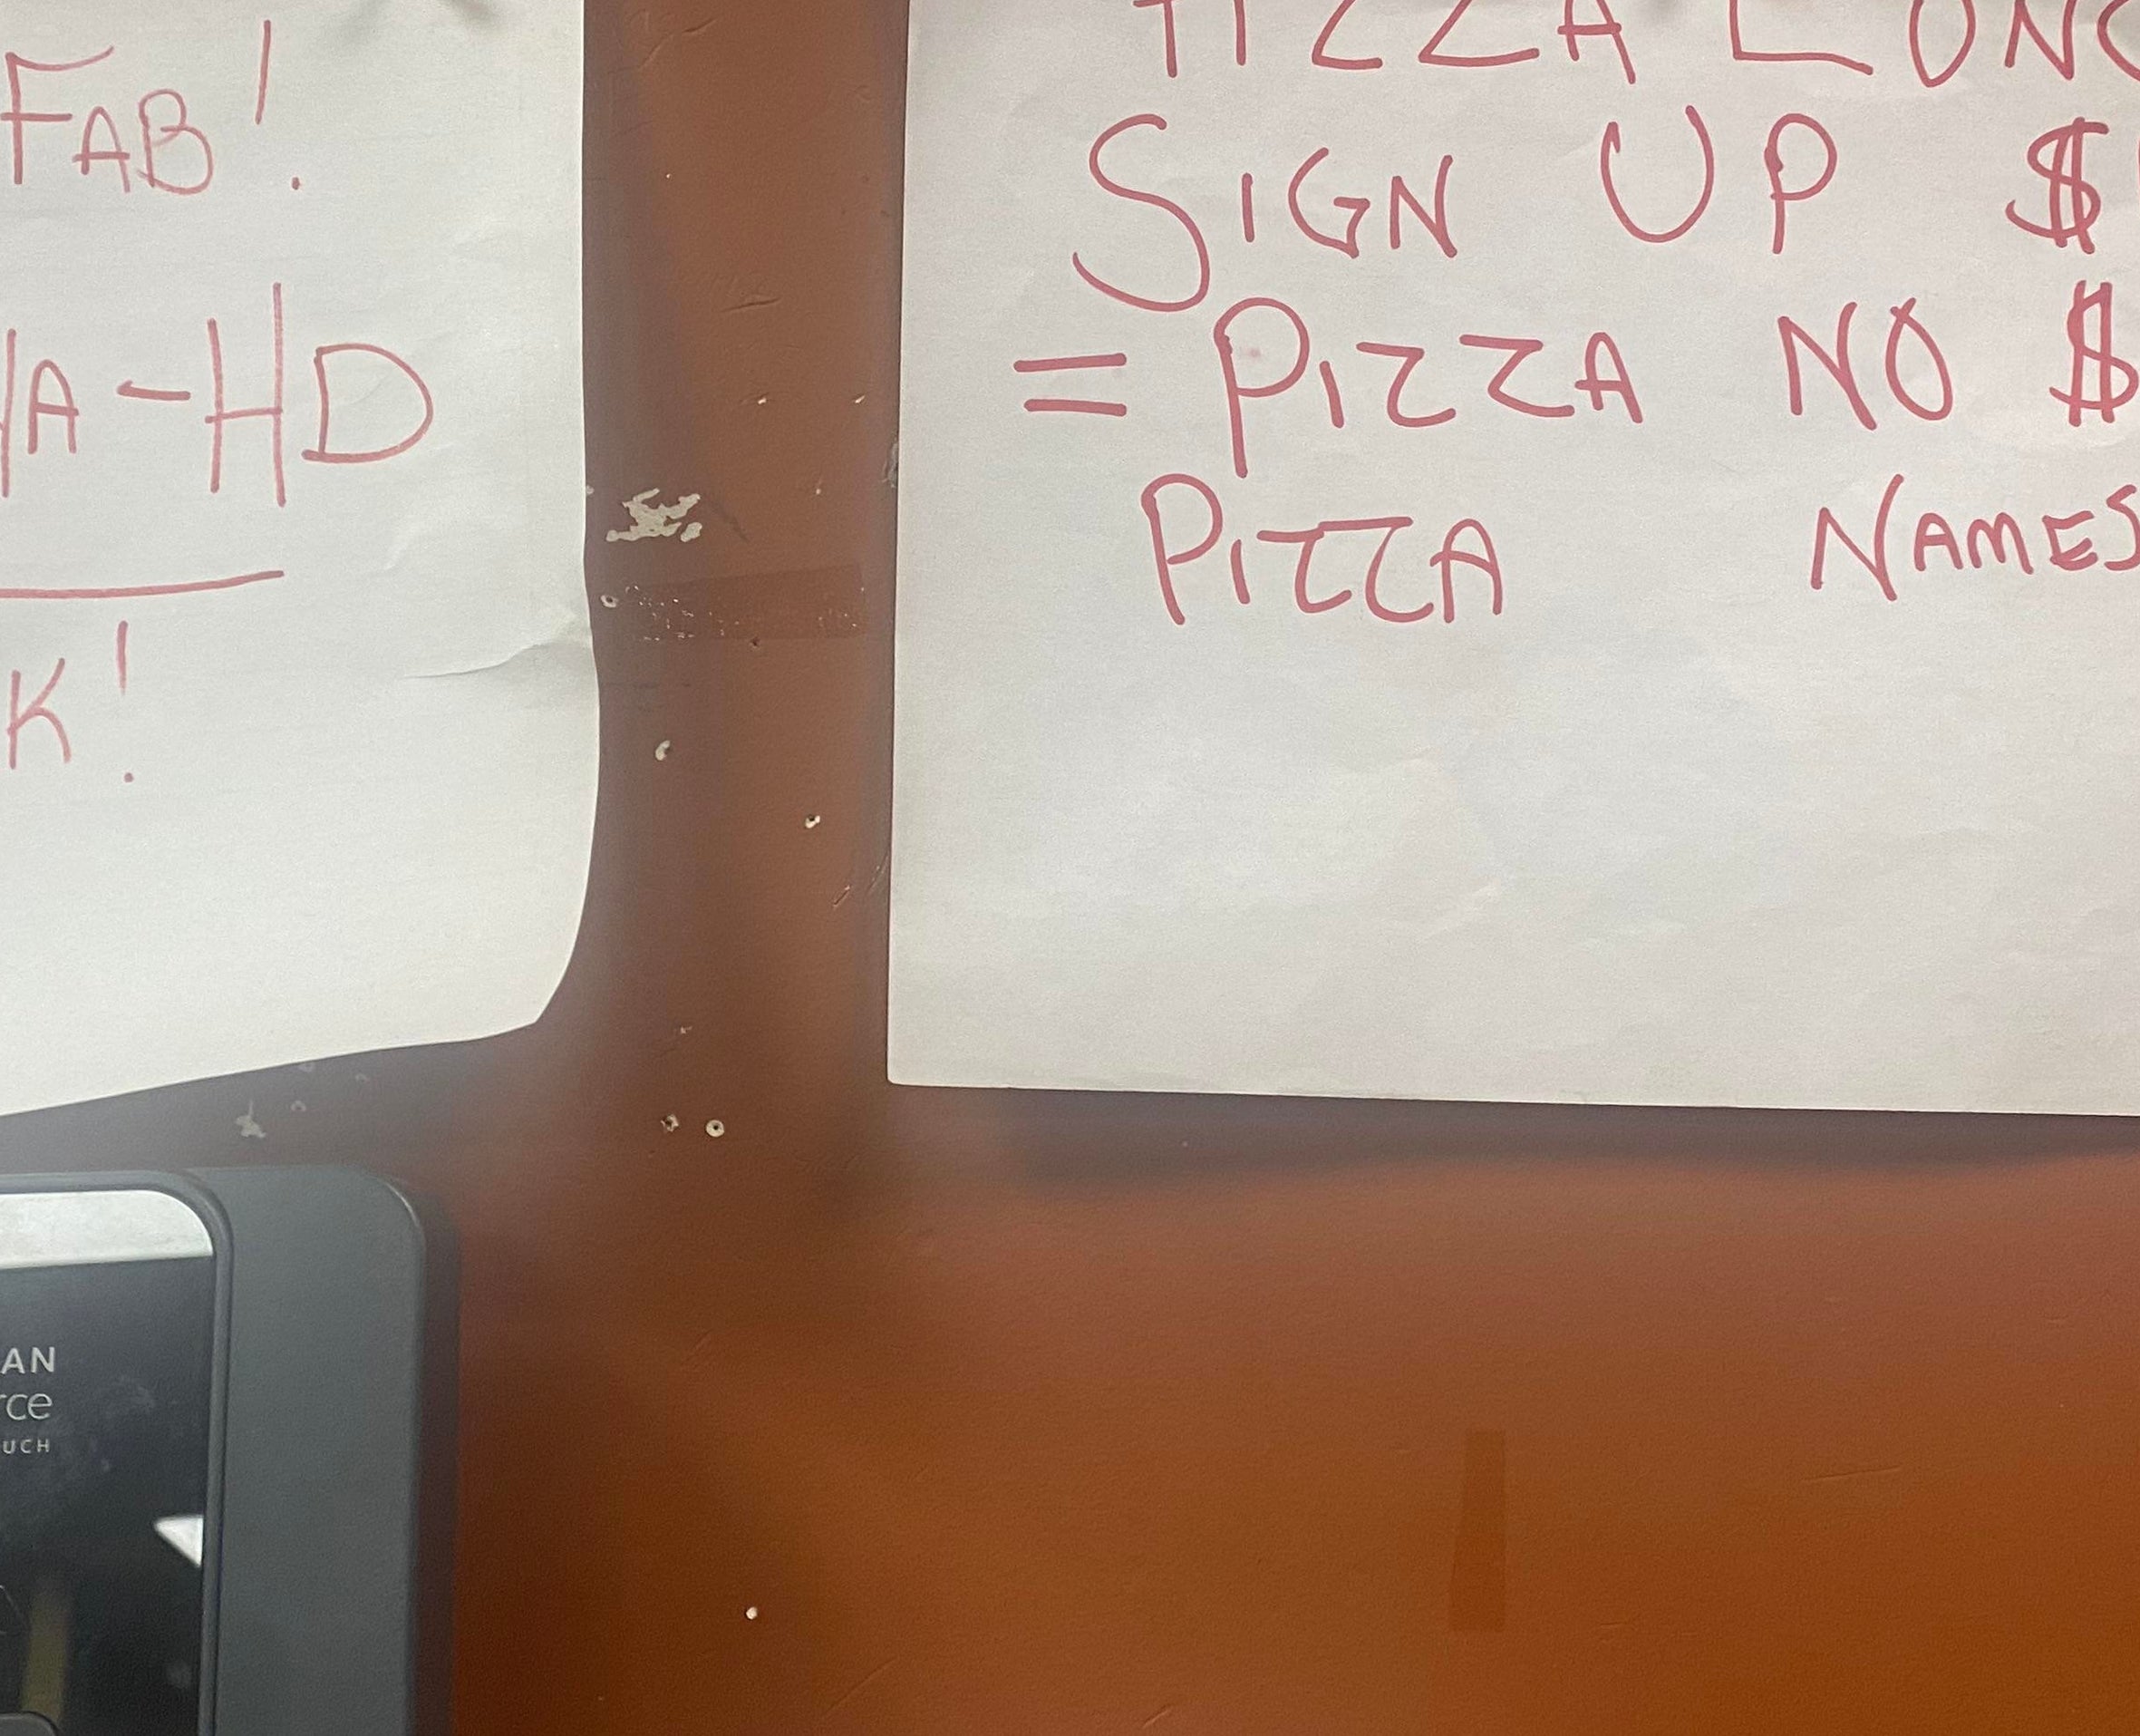 A sign asks for people to sign up to pay $10 each for a pizza lunch